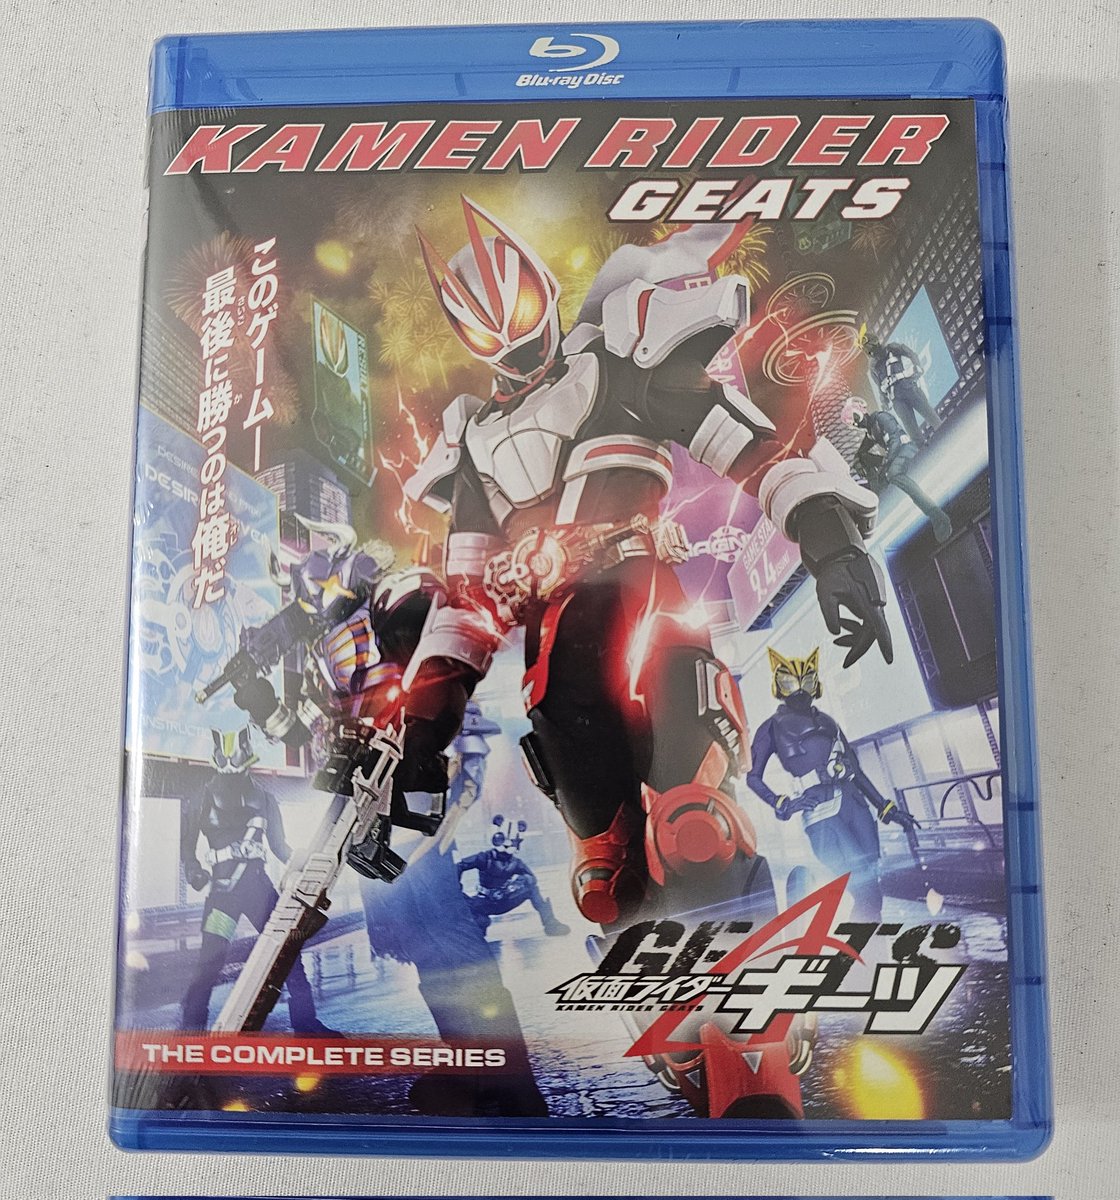 ⚡ Giveaway! ⚡ Like + Repost + Follow to win this #KamenRider Geats Complete Series Blu-Ray! Fans outside US can enter, but must pay shipping! Buy from Shout! Factory: shoutfactory.com/products/kamen…